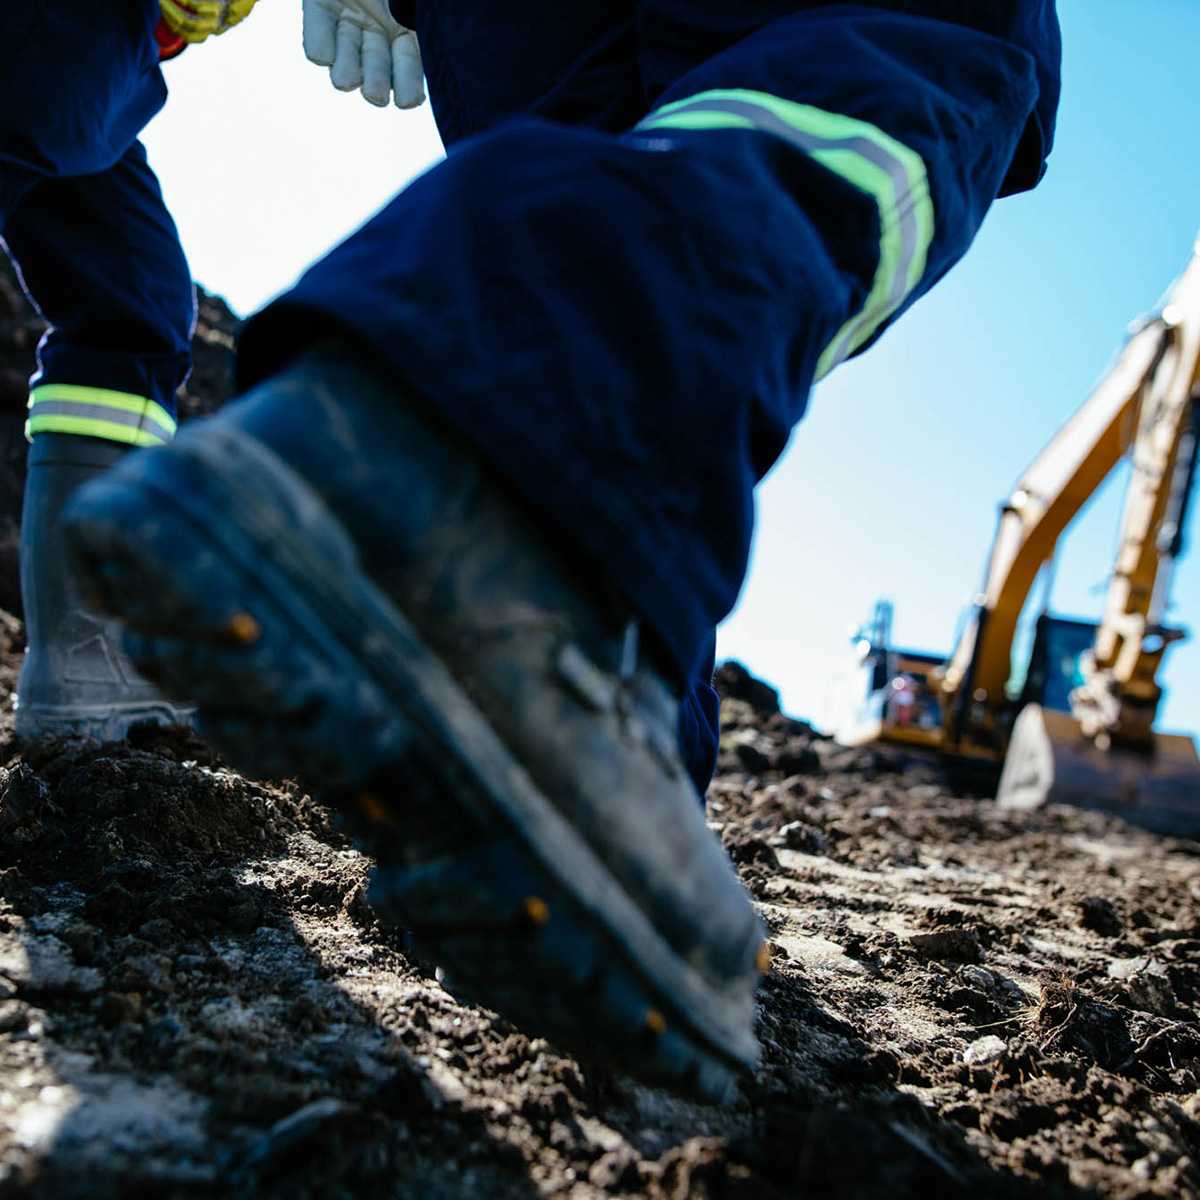 Focus on walking boots of two workers in mud. Blurred background of machinery.